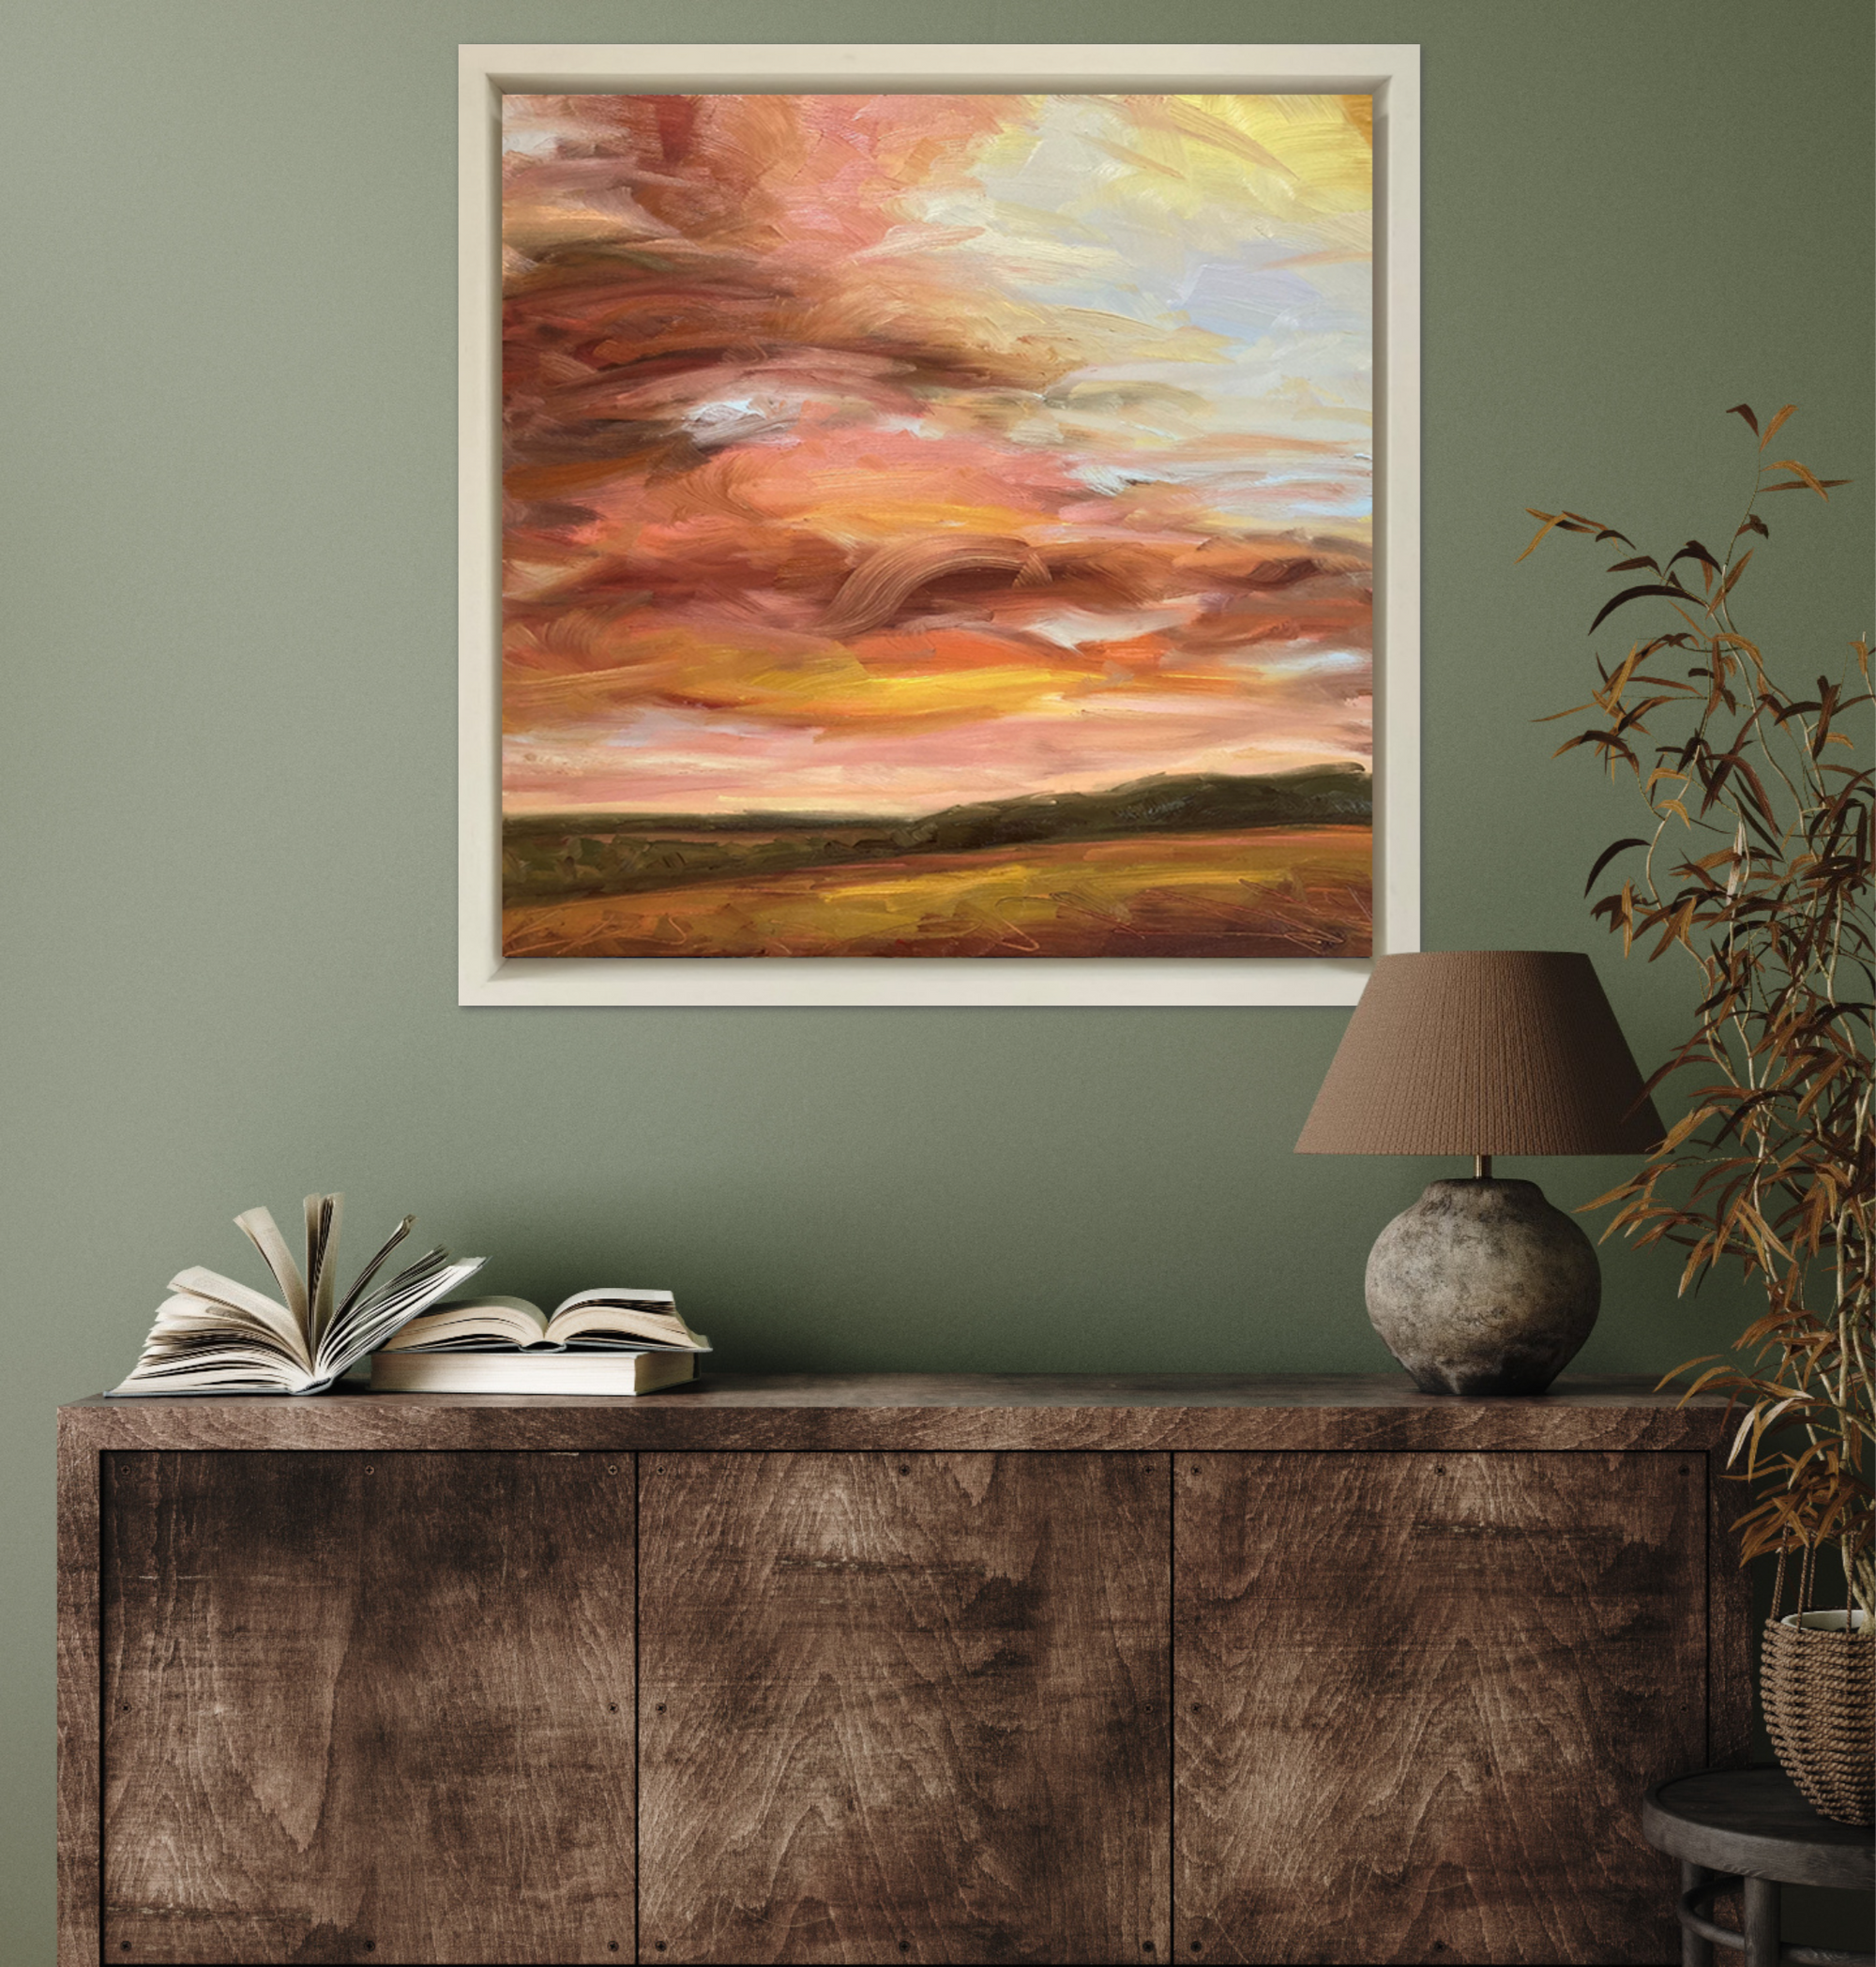 Glowing Original Oil Landscape Painting In Room Setting 3